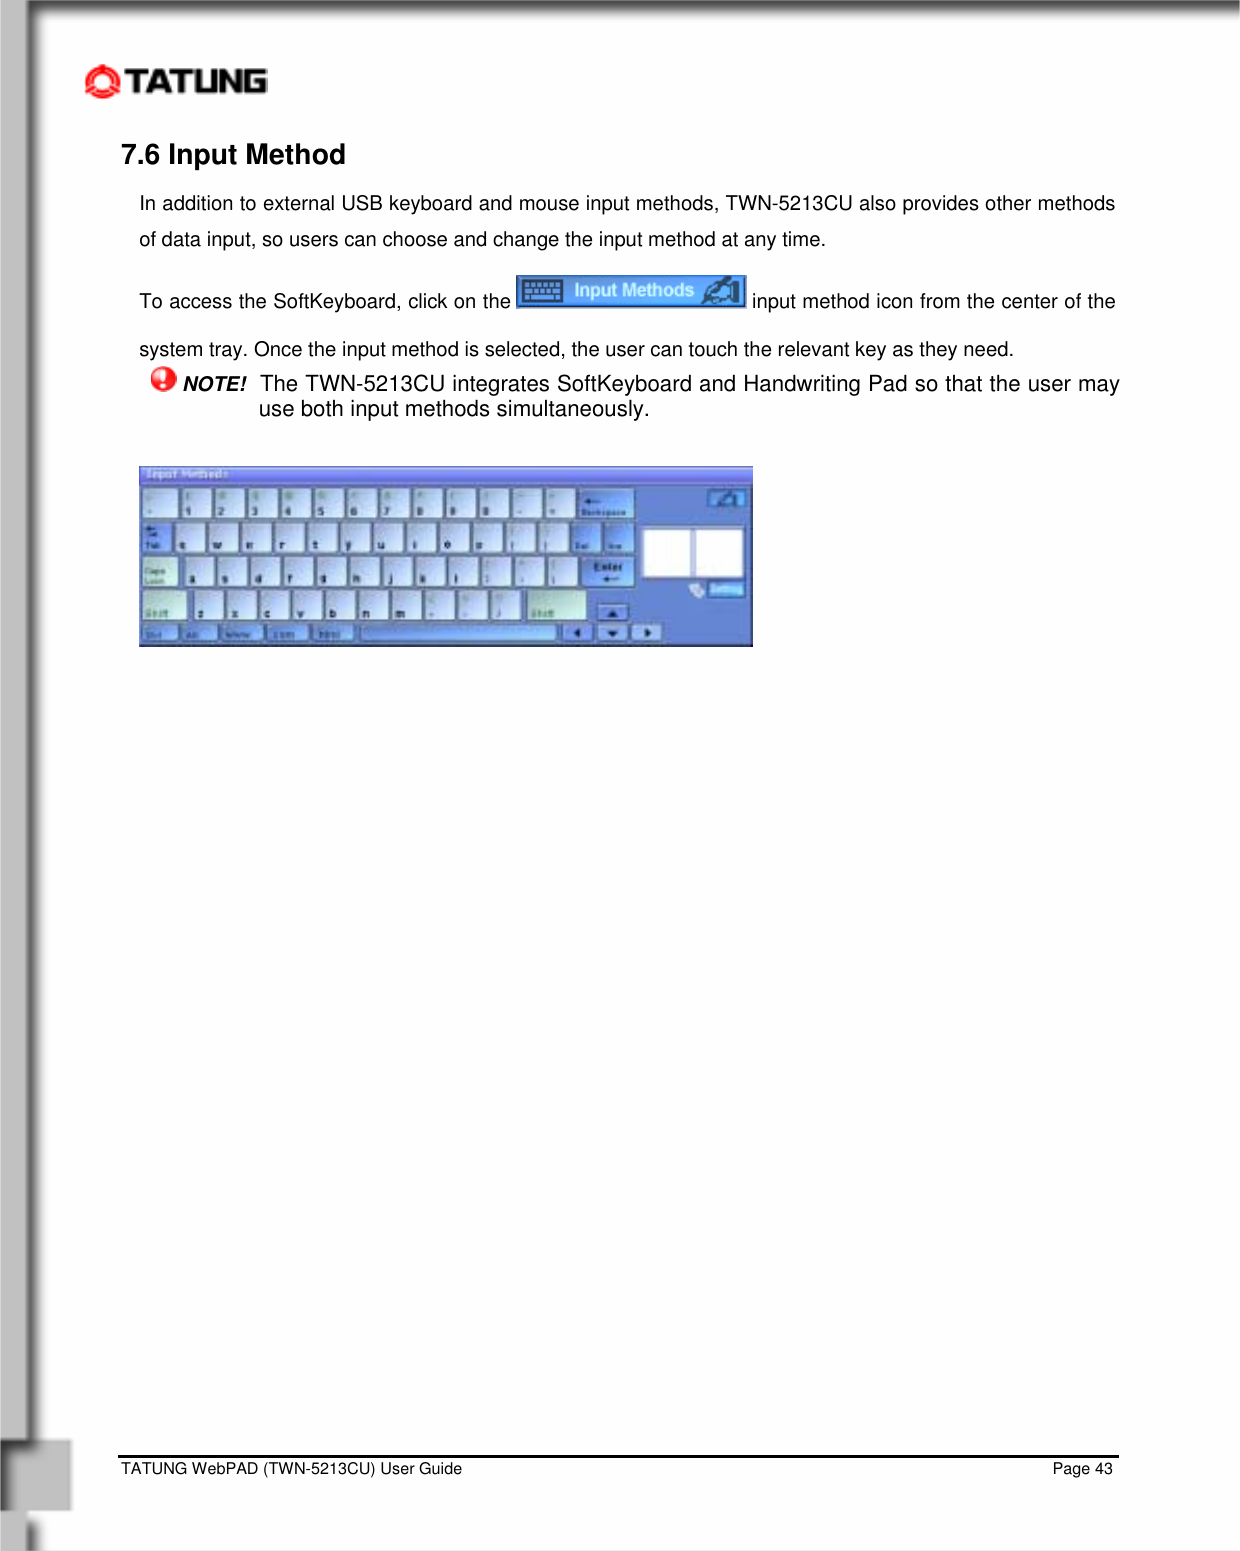    TATUNG WebPAD (TWN-5213CU) User Guide                                                                                                                                   Page 43 7.6 Input Method In addition to external USB keyboard and mouse input methods, TWN-5213CU also provides other methods of data input, so users can choose and change the input method at any time. To access the SoftKeyboard, click on the   input method icon from the center of the system tray. Once the input method is selected, the user can touch the relevant key as they need.  NOTE!  The TWN-5213CU integrates SoftKeyboard and Handwriting Pad so that the user may use both input methods simultaneously.                       